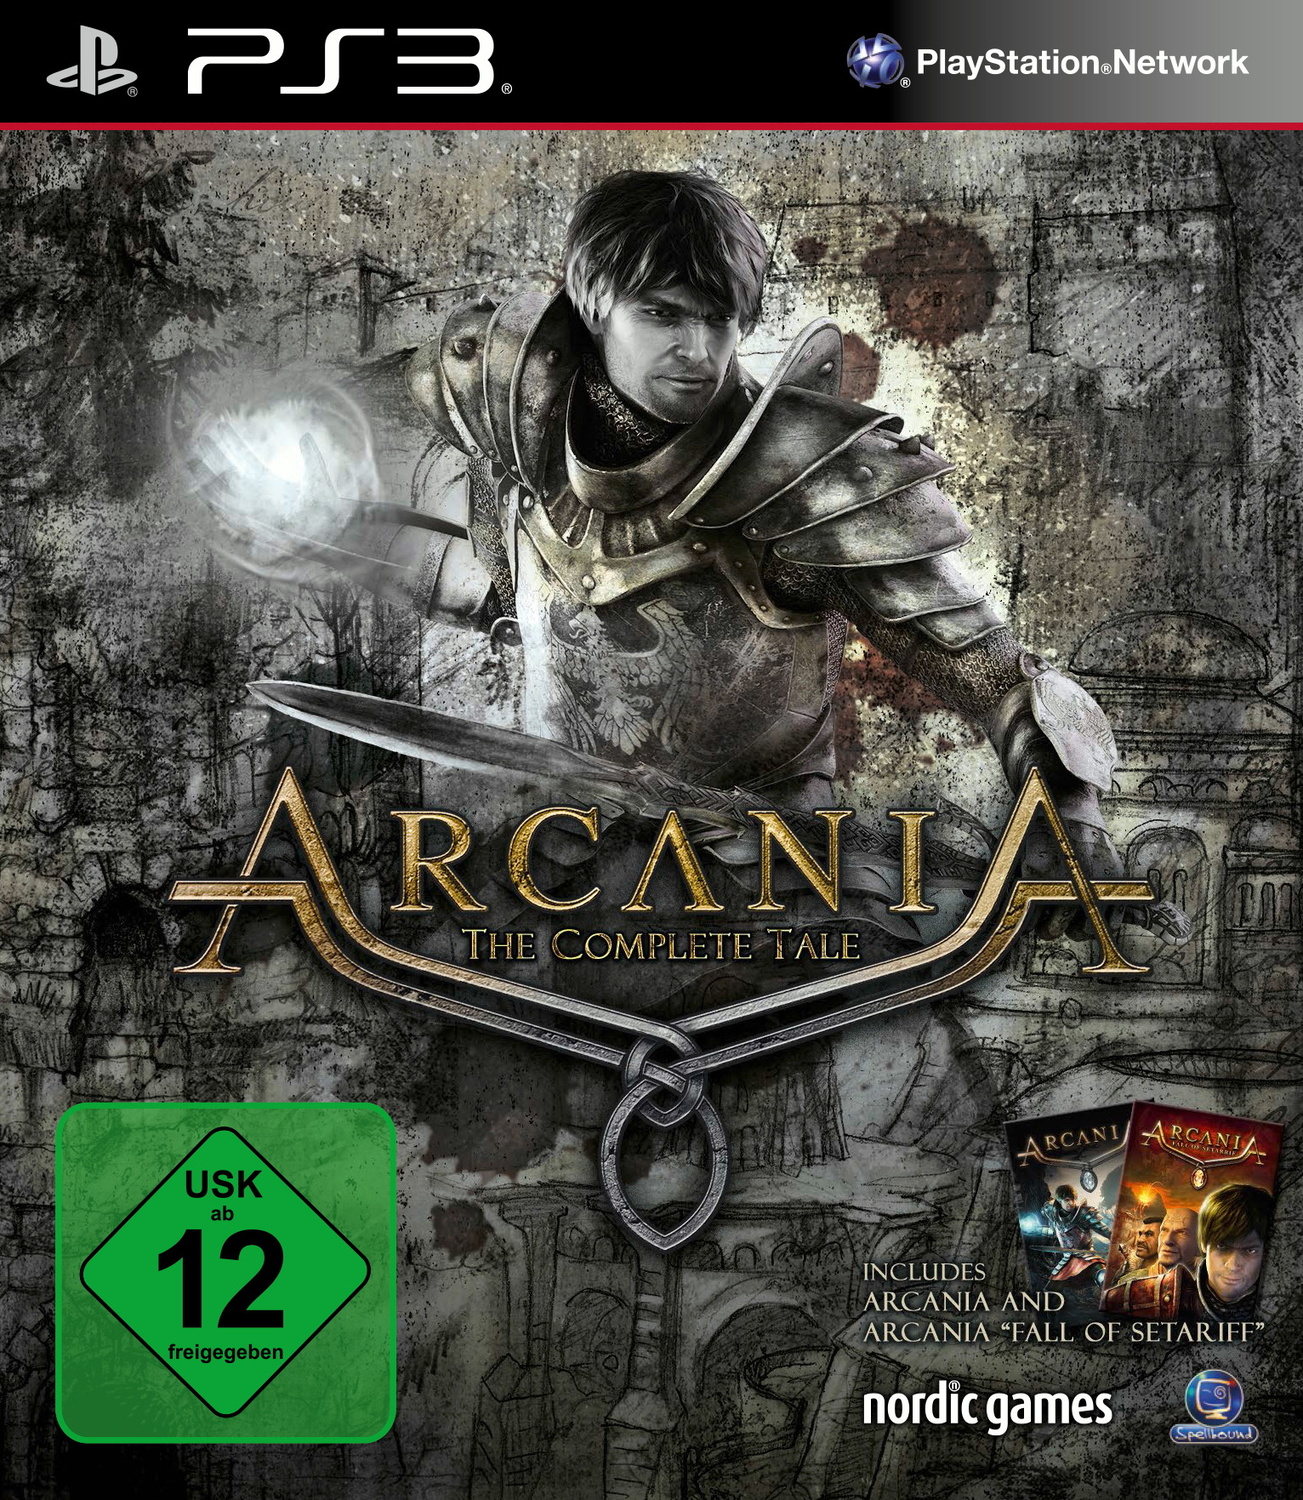 [PlayStation The - ArcaniA Tale 3] - Complete